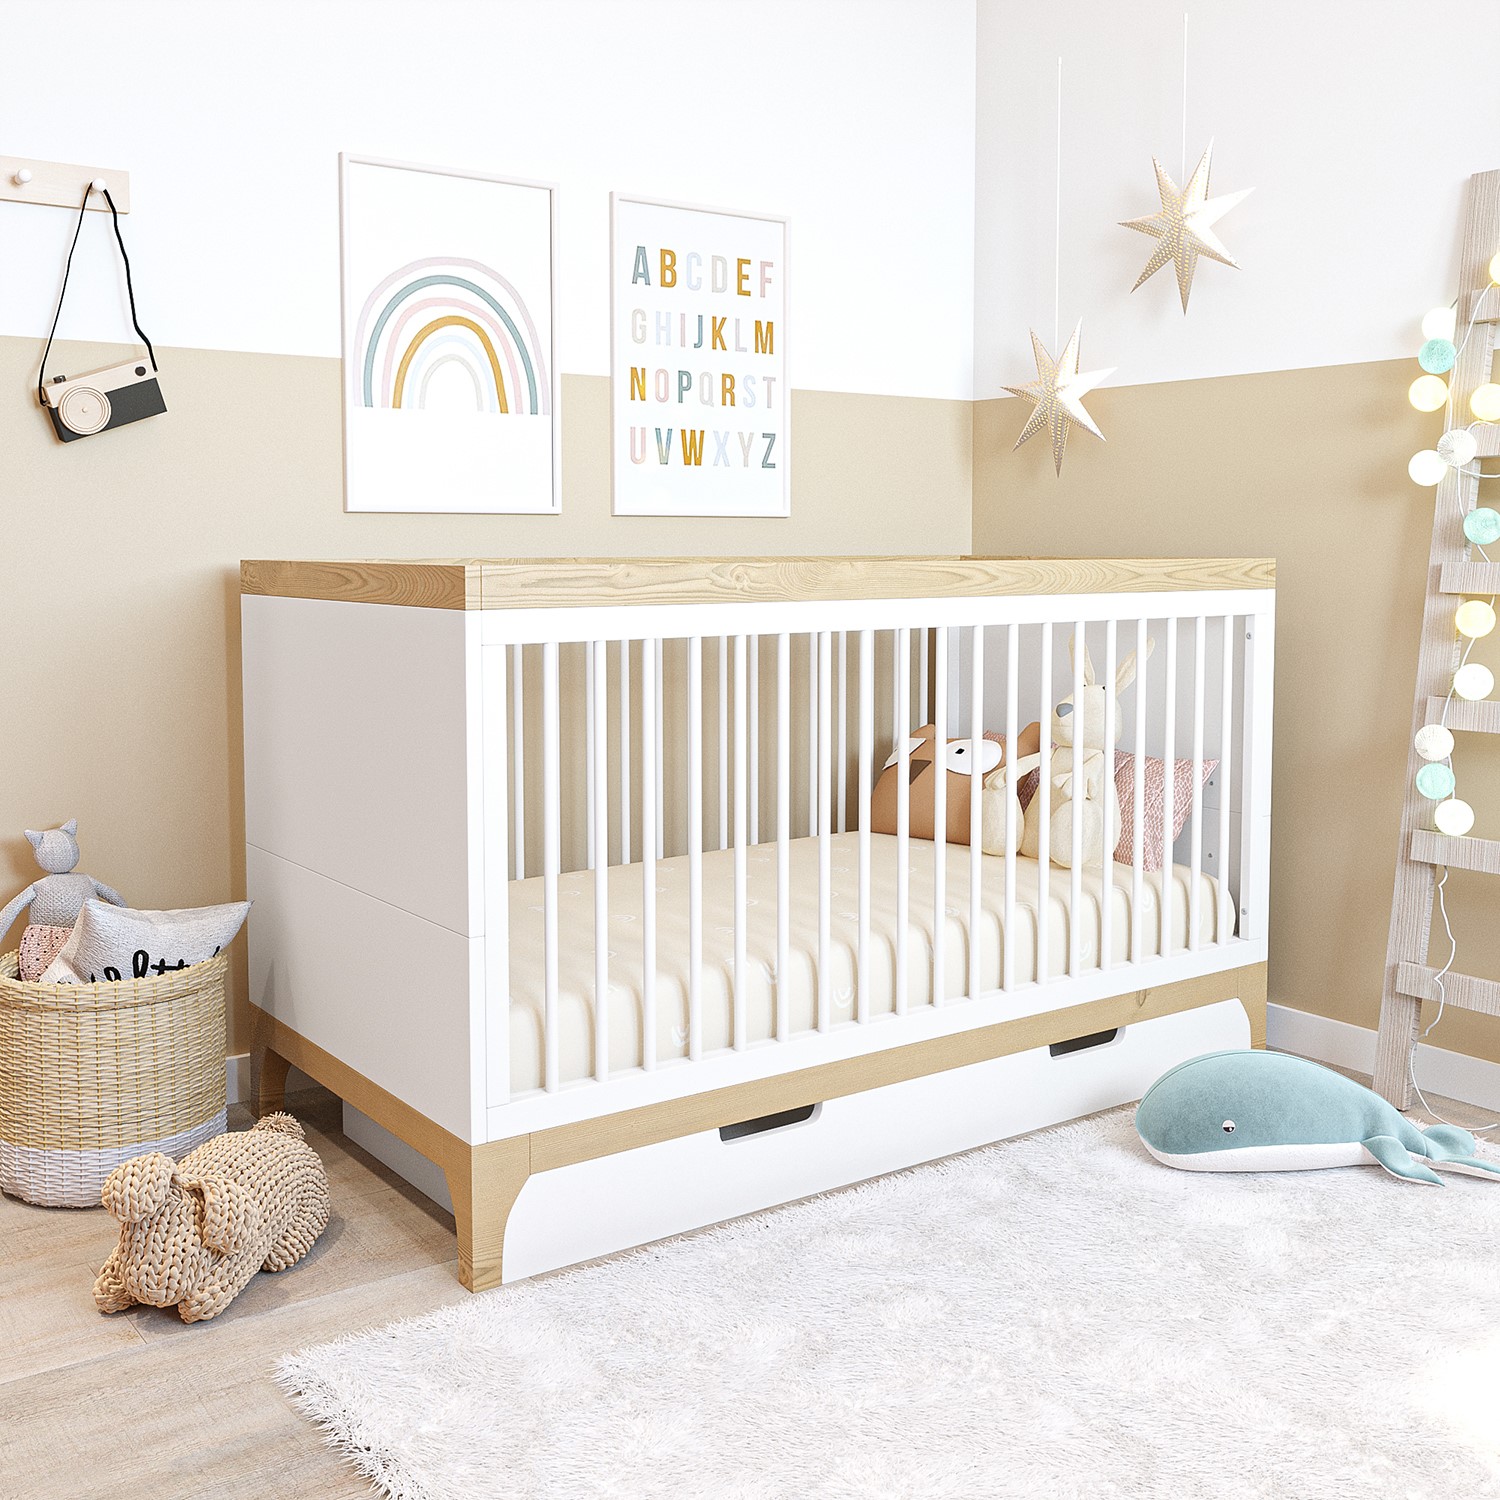 Read more about 2 piece nursery furniture set with cot bed and changing table in white rue